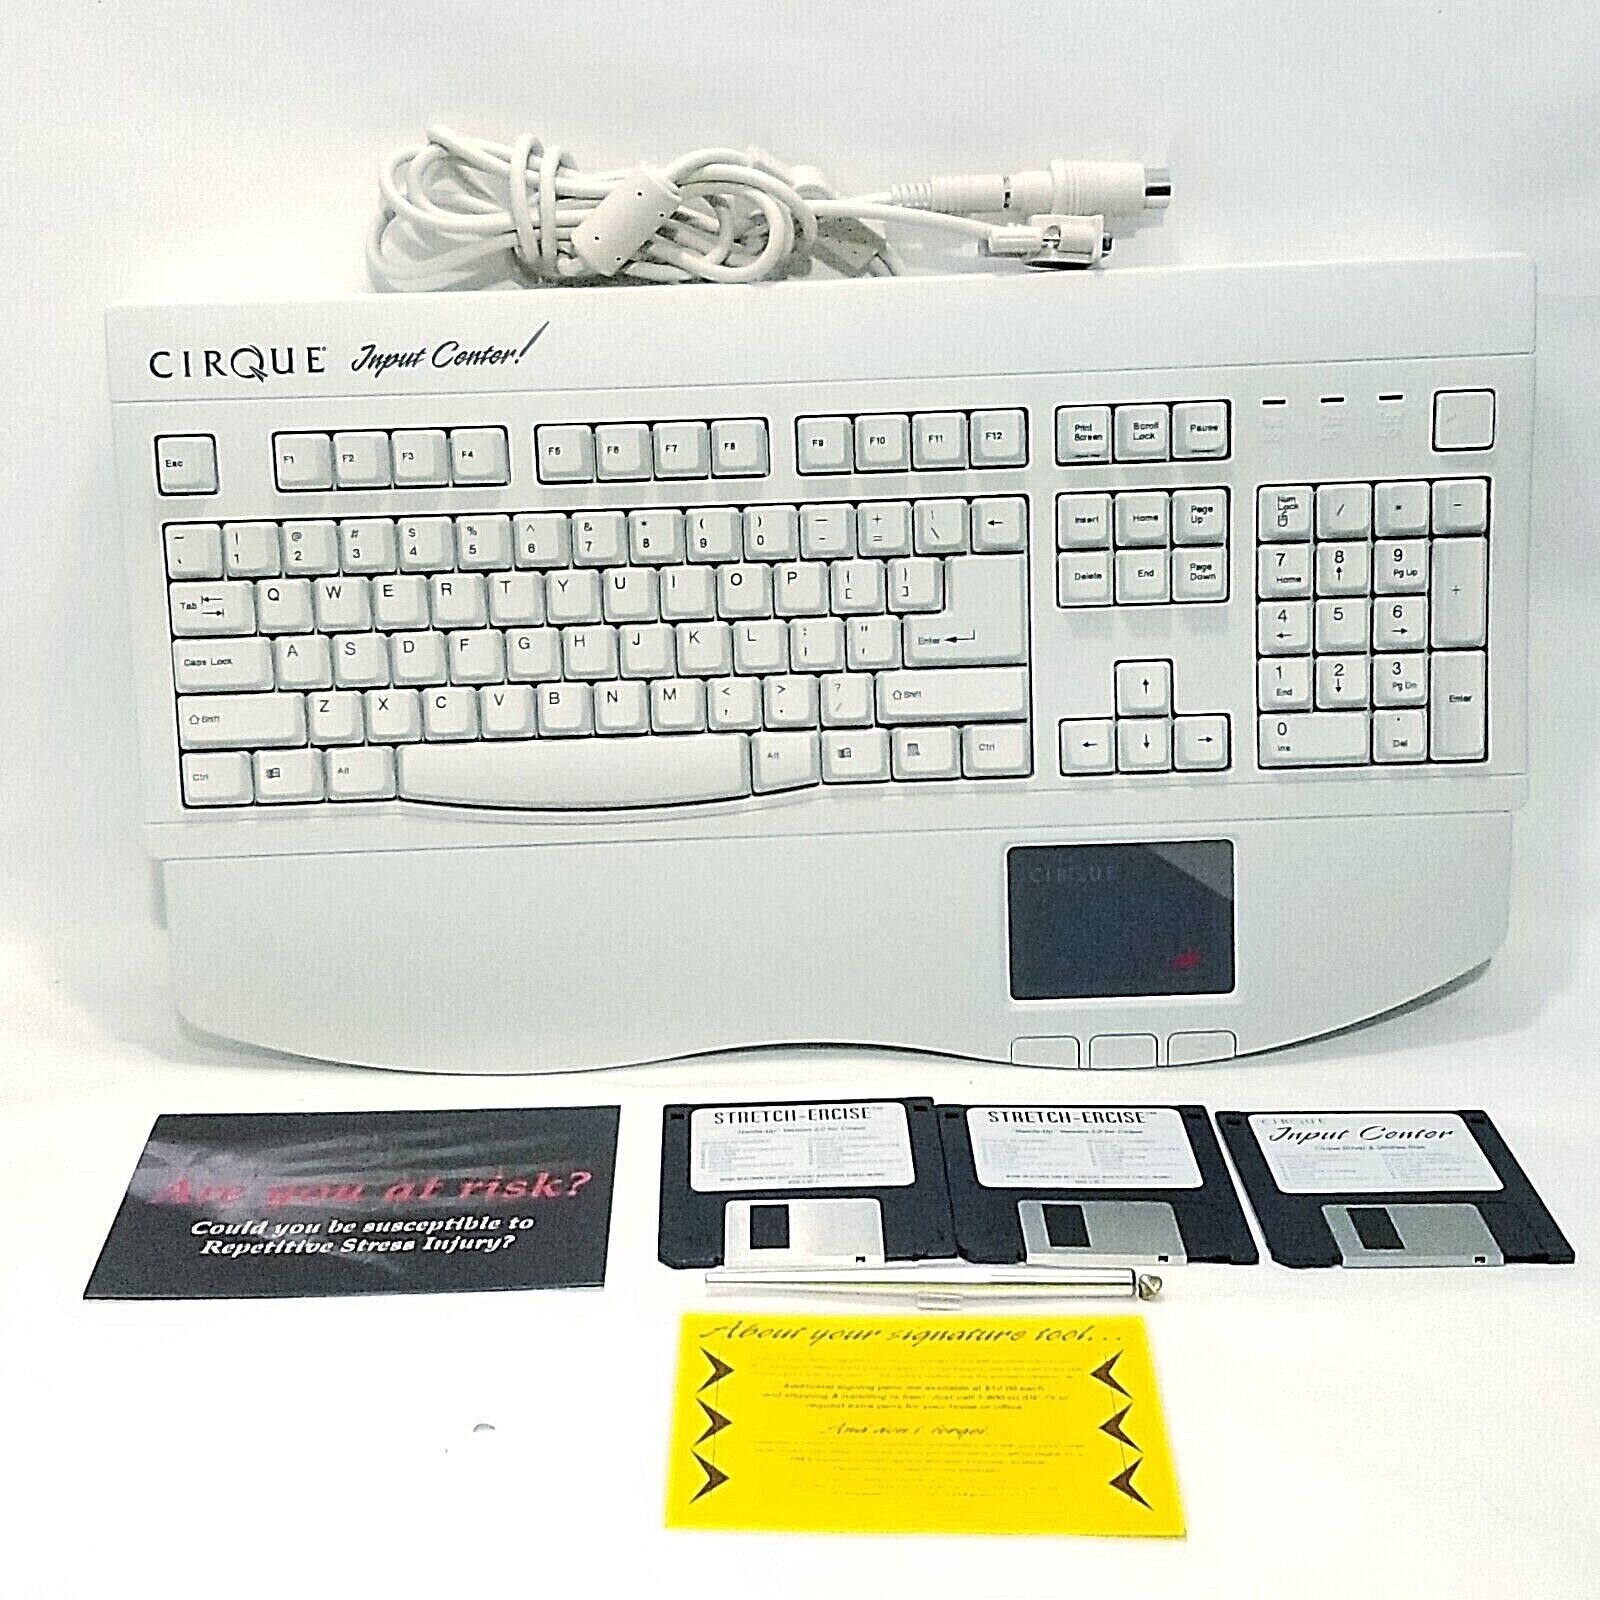 VINTAGE Cirque Input Center Keyboard Glidepoint CIC360 Signing Tool Software Pen